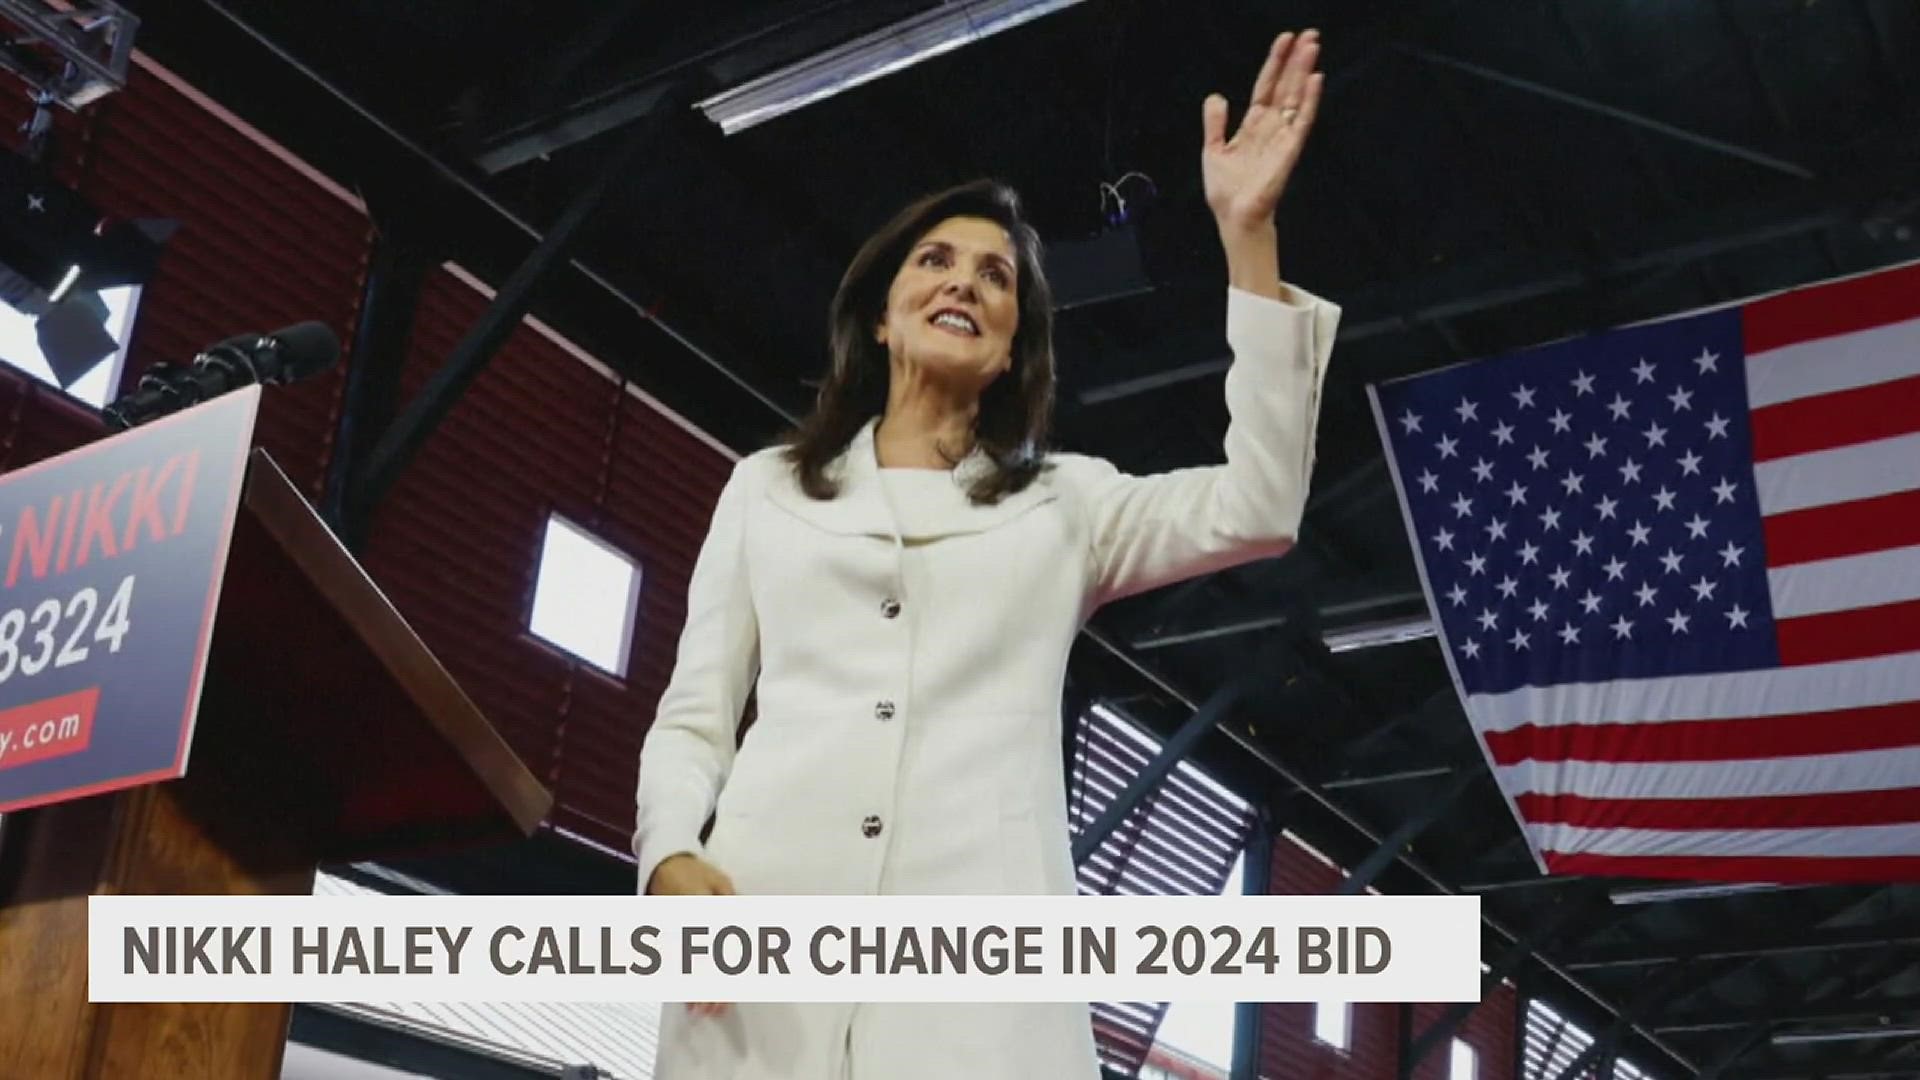 Haley is the first major challenger to her former boss for the 2024 Republican nomination.